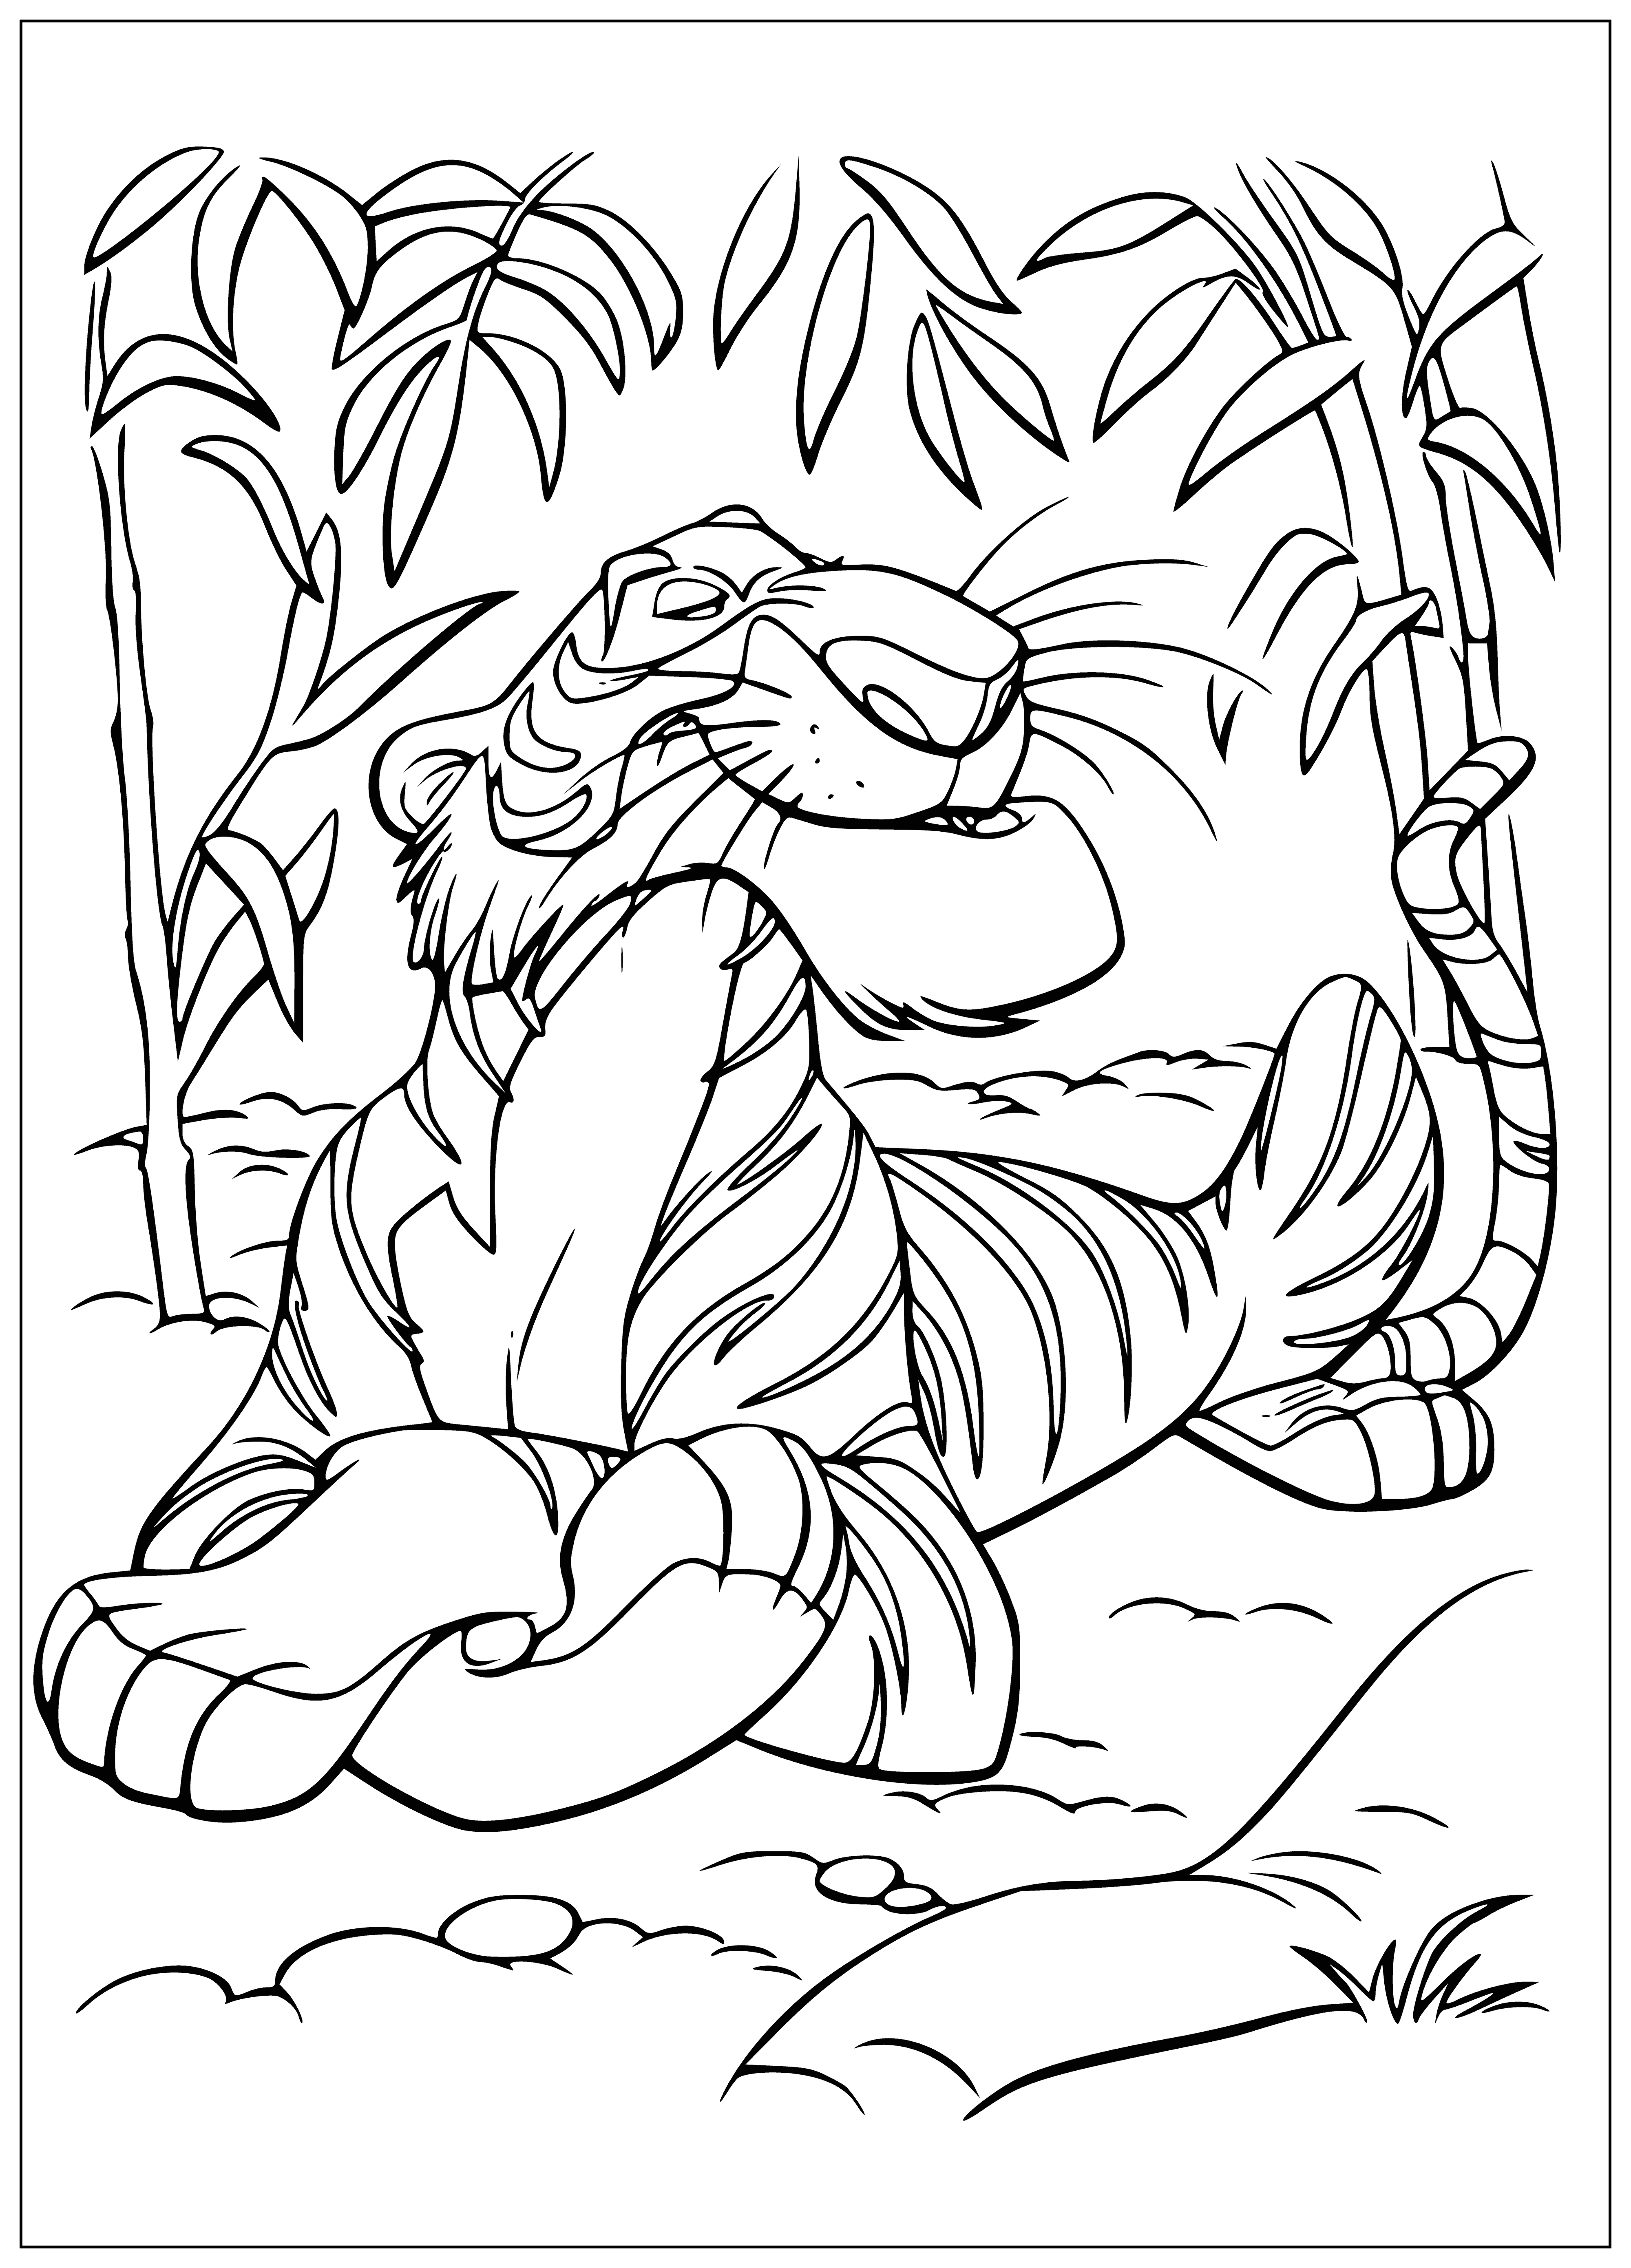 Tiger Shere Khan coloring page